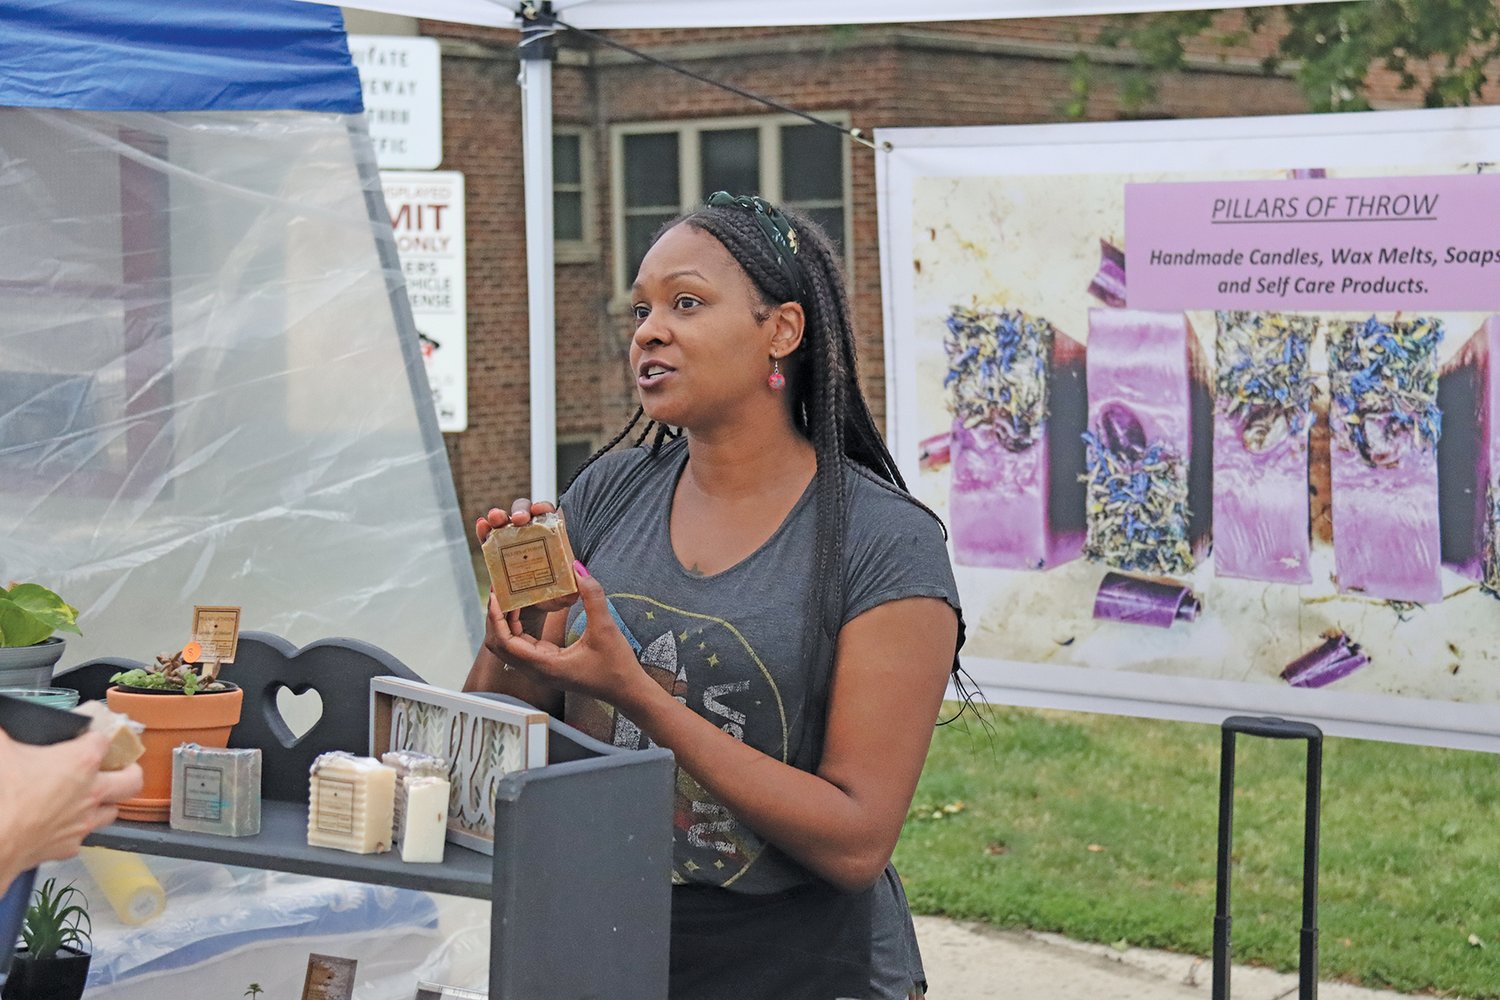 Handmade candles, soaps and self-care products were sold at the Pillars of Throw booth.